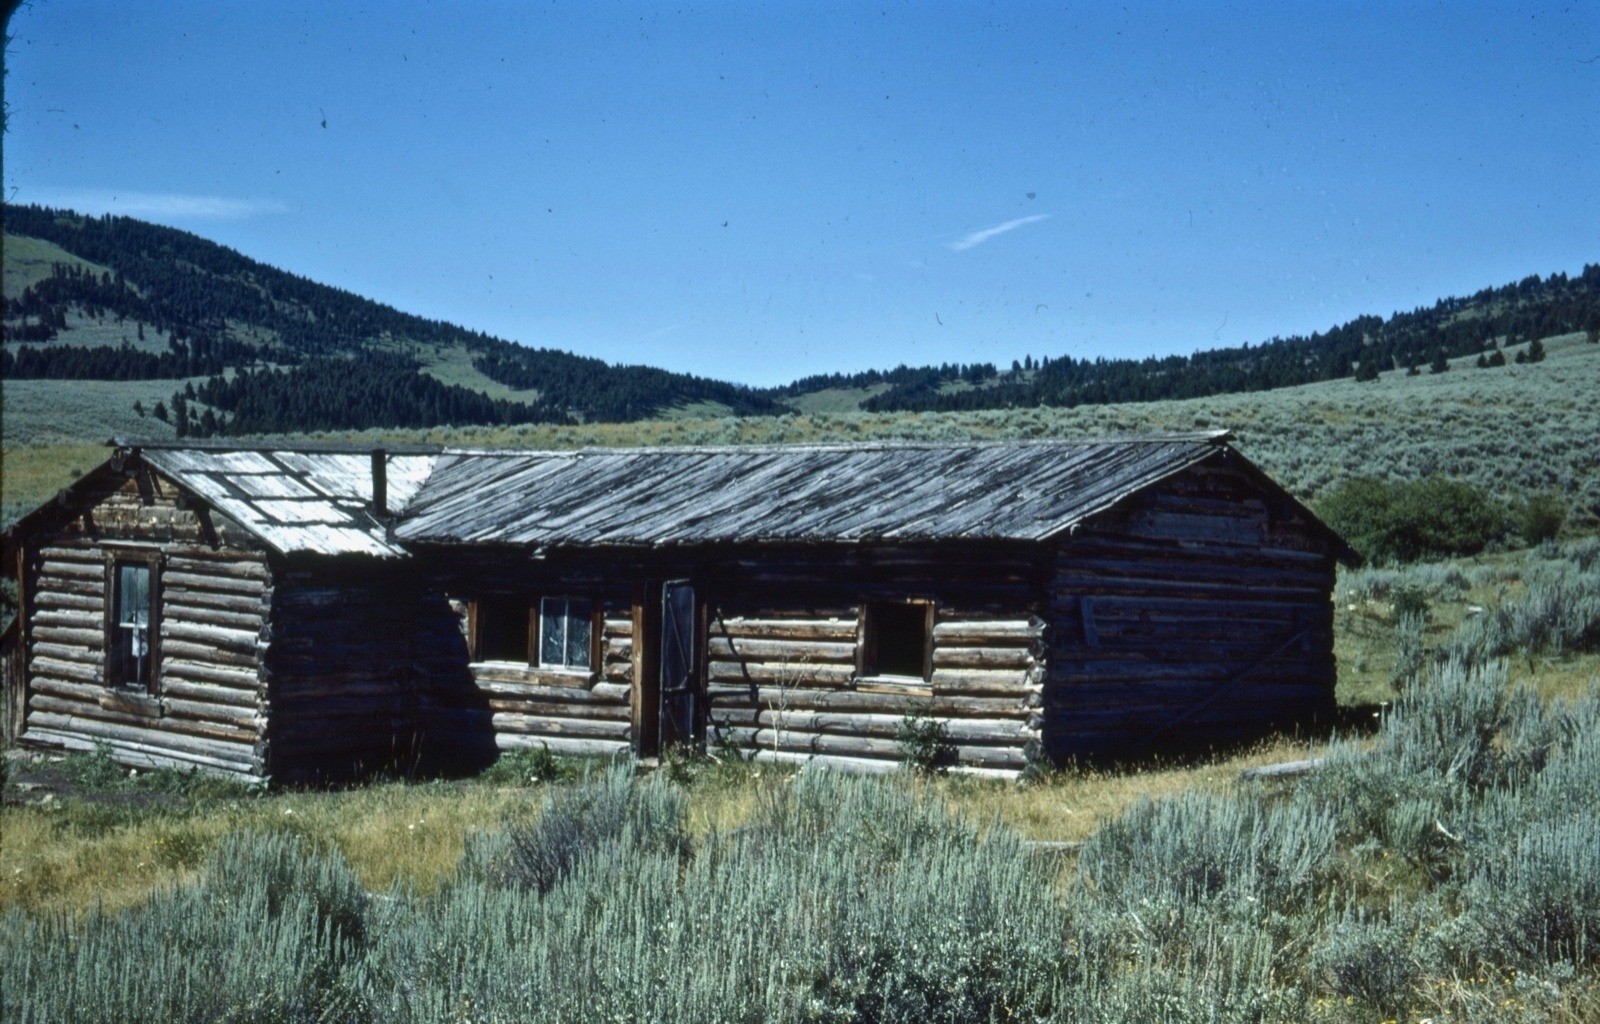 Doig homestead at Sixteen Mile outside of Ringling in the lower Shields Valley.  As Doig noted in his books, beauty alone doesn't put food on the table or feed hungry families. Life in Montana was hard. Photo courtesy MSU Library Arives/Doig Collection